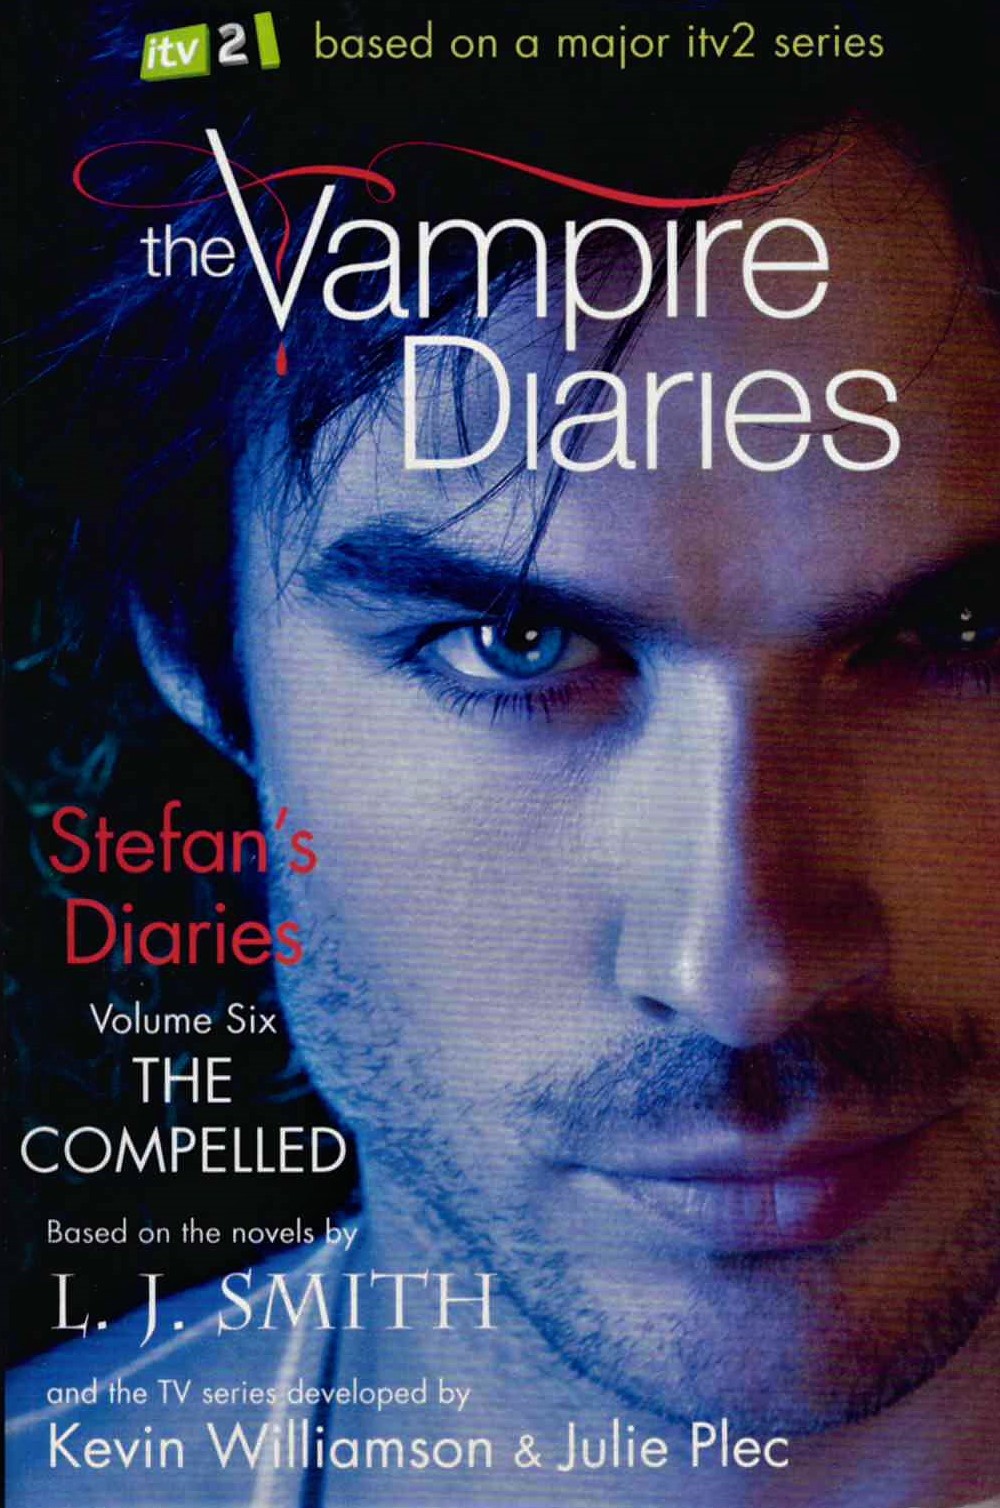 The Vampire Diaries. Stefan's Diaries: The Compelled